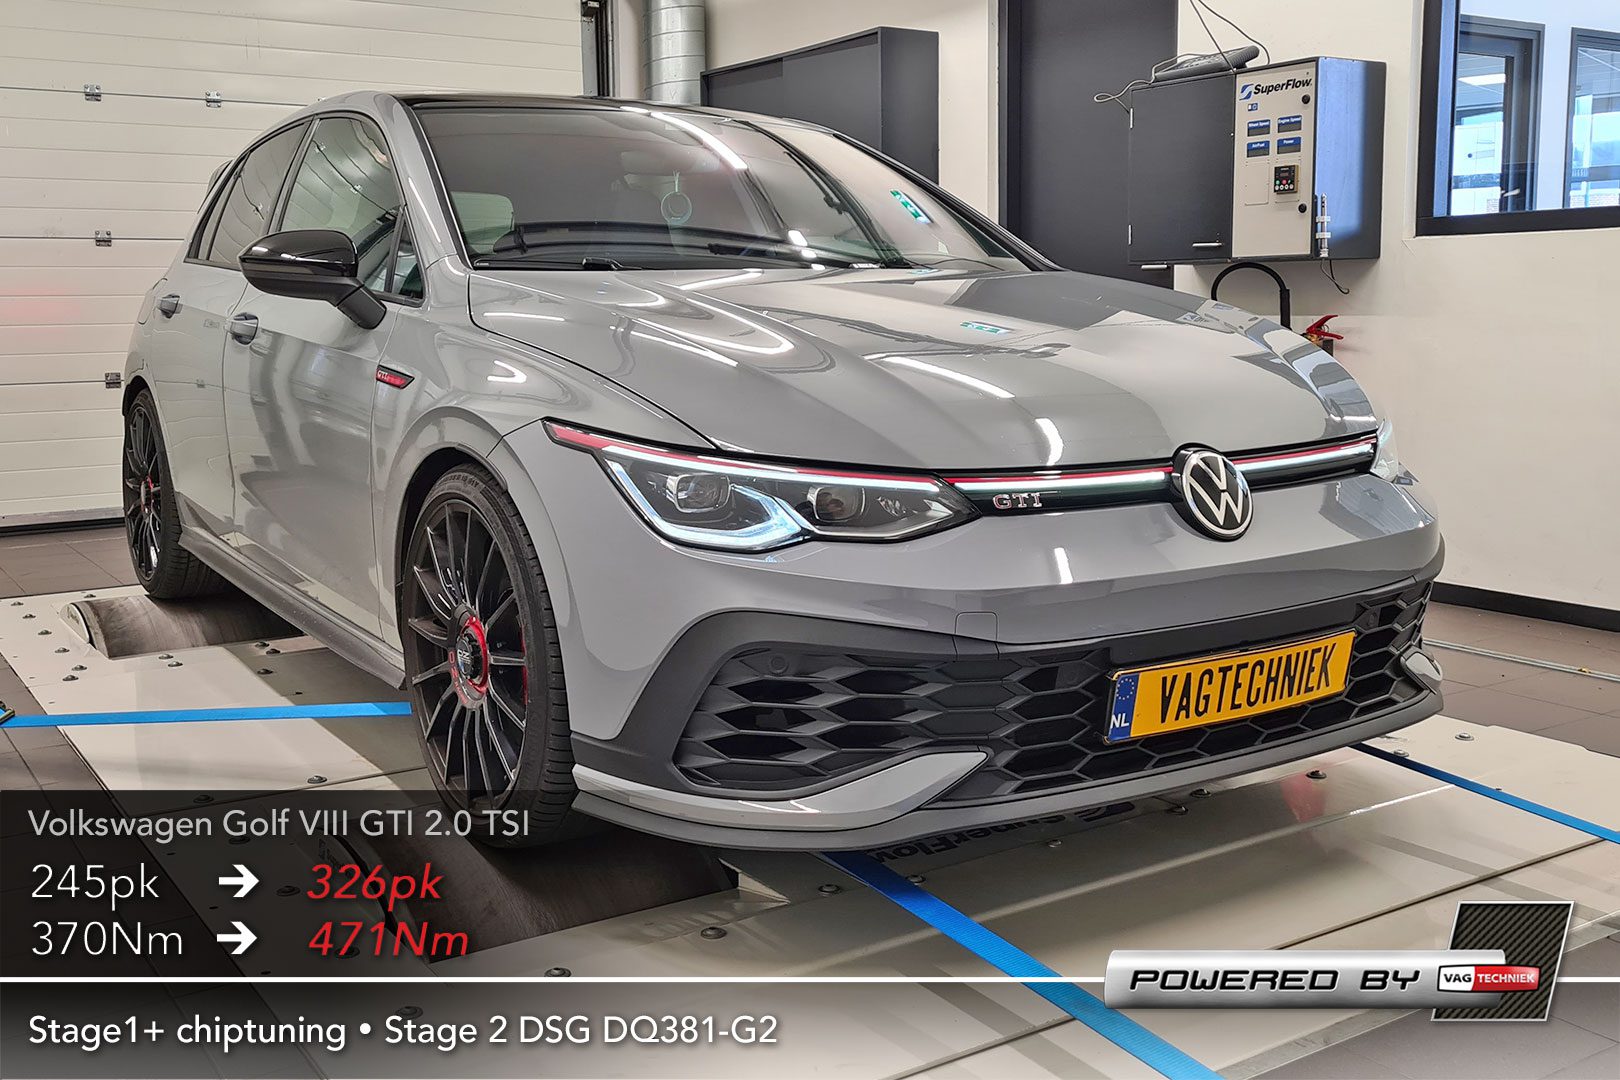 Chiptuning VW Golf 8 GTI Clubsport 2.0 TSI - Stage 1